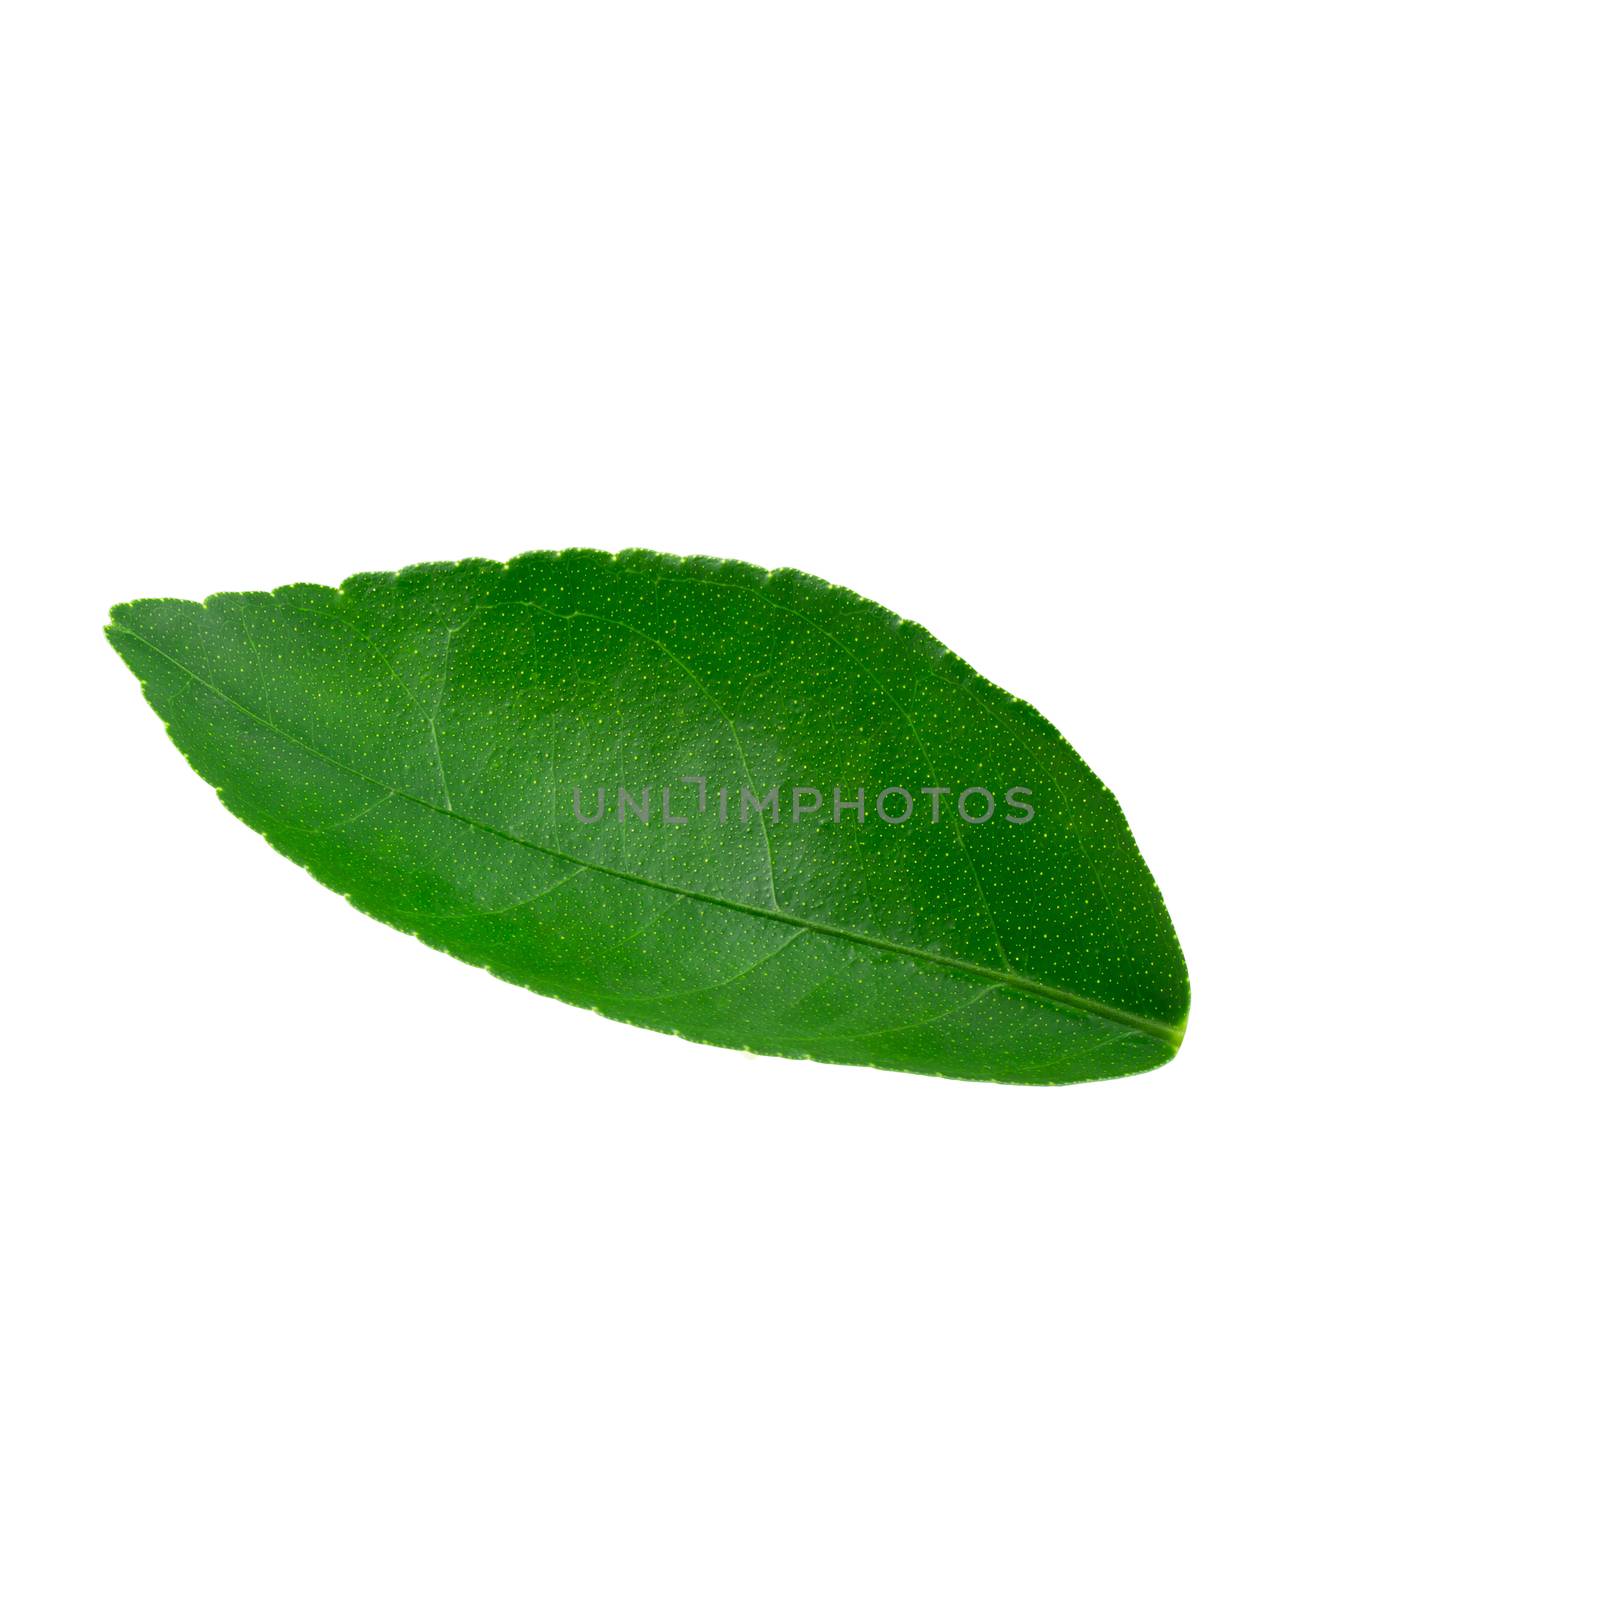 Citrus leaves isolated on a white background by kaiskynet